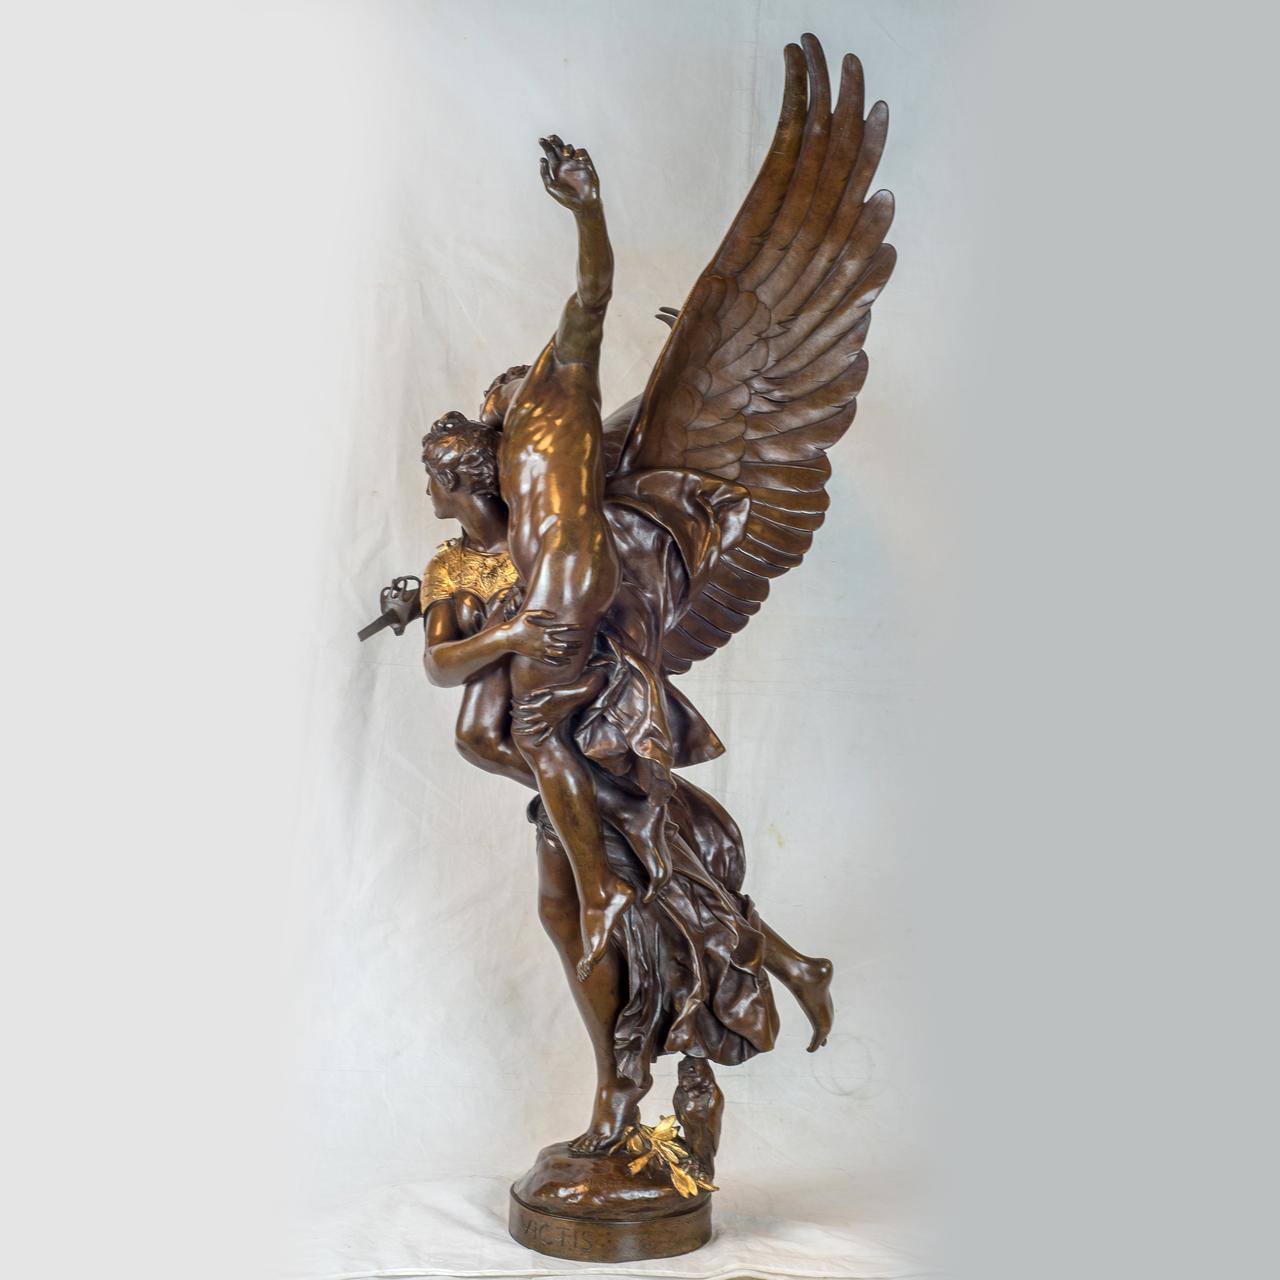 Gloria Victis, a winged figure of victory carrying a fallen warrior casted in bronze with brown patina. Inscribed with 'F. Barbedienne. Fonduer' mark and seal on base: A. Mercie / Gloria Victis.

Maker: Jean Antonin Mercié (1845-1916).
Date: 19th